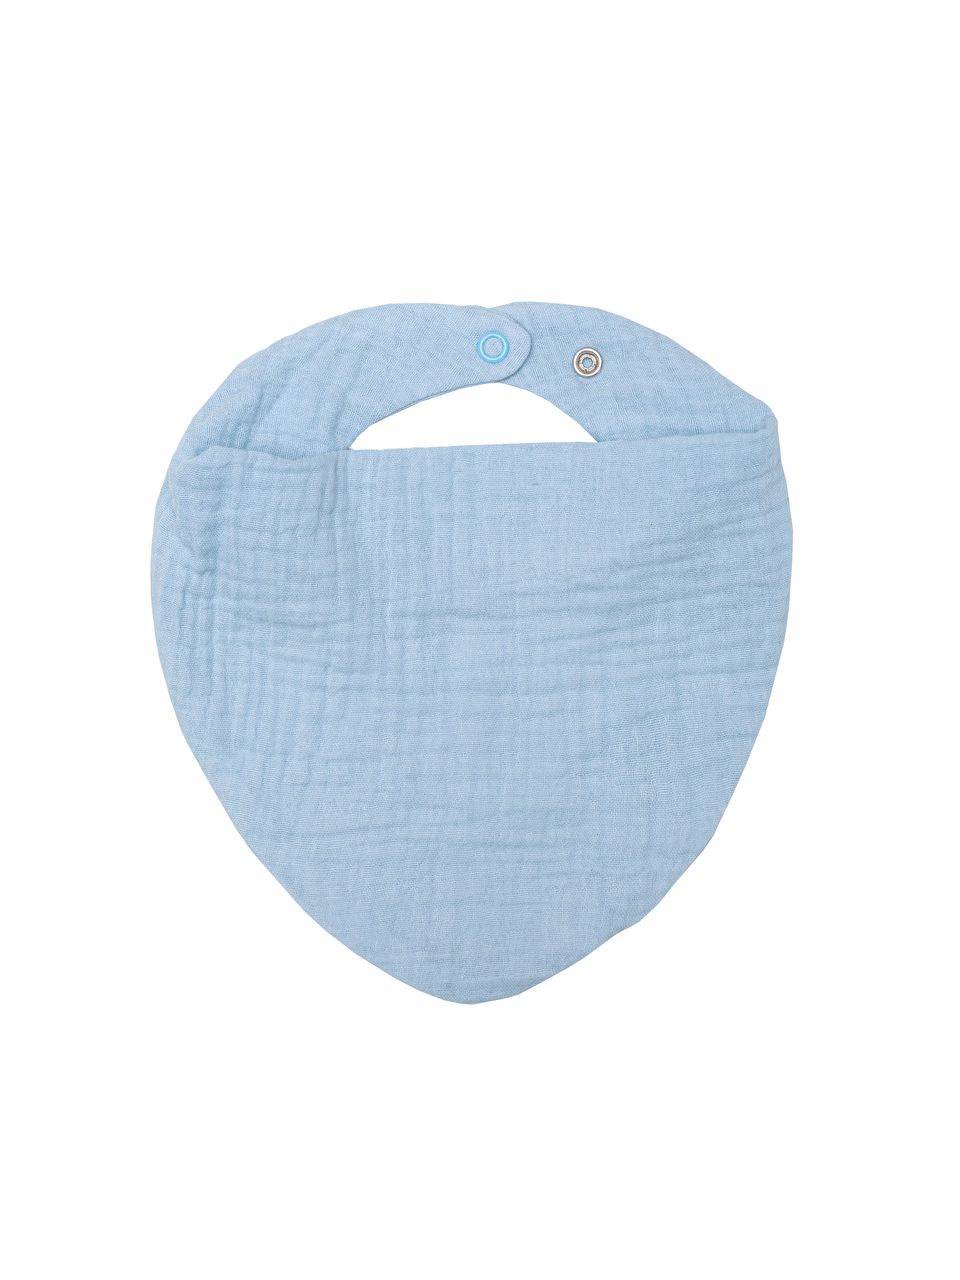 MUSLIN PACIFIER CLIP 2 PACK - IRON & BABY BLUE - Wooly Organic